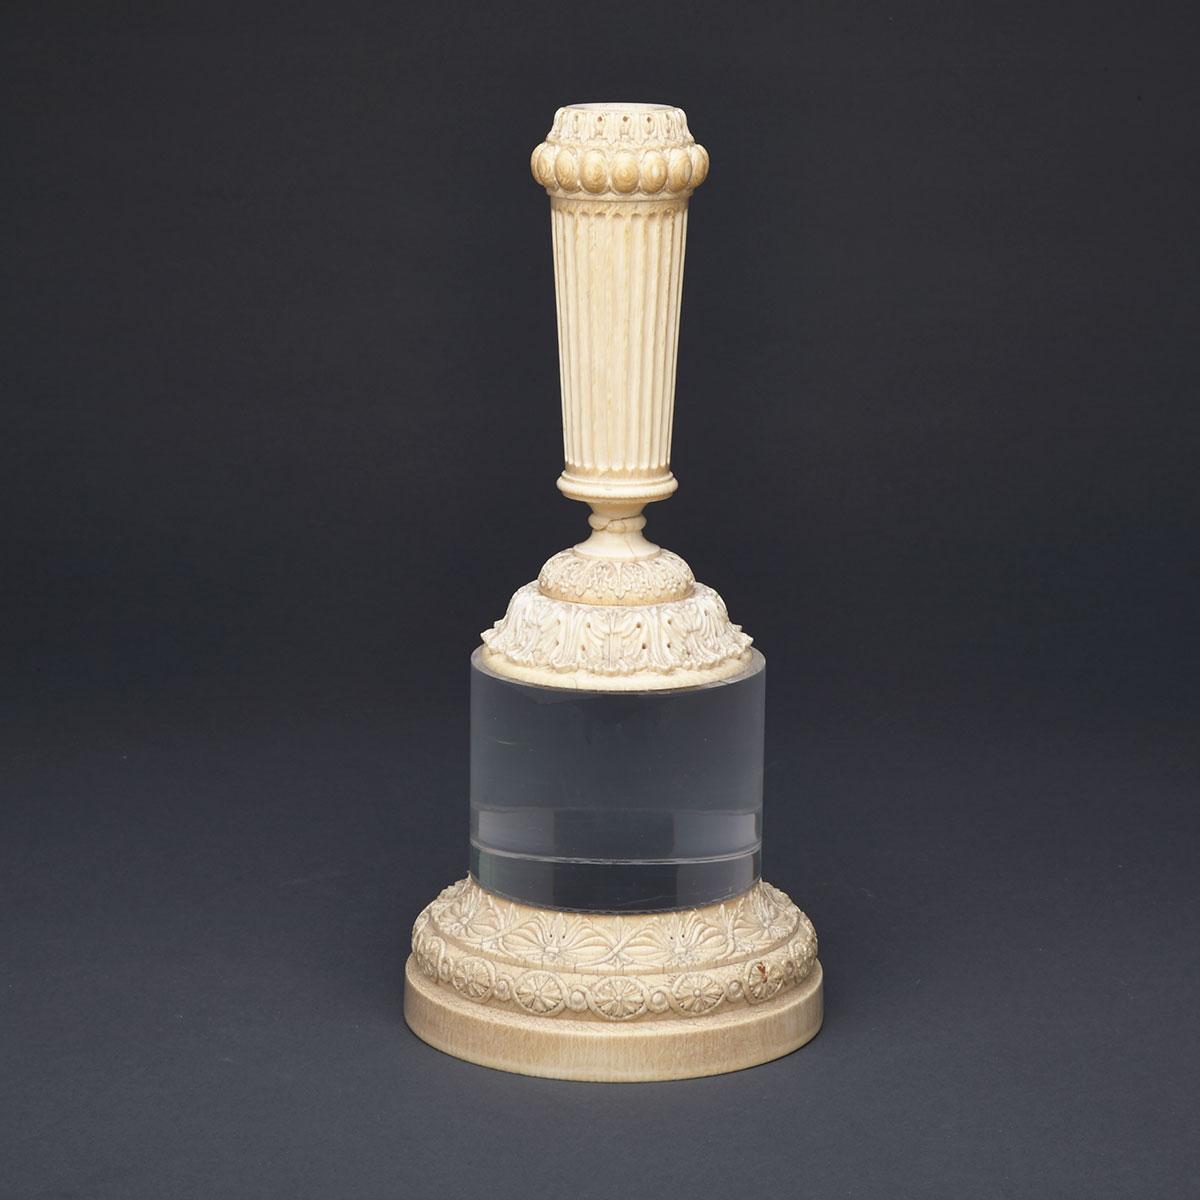 George III Anglo-Indian Turned and Carved Ivory Candelabrum Base, Murshidabad, late18th/early 19th century